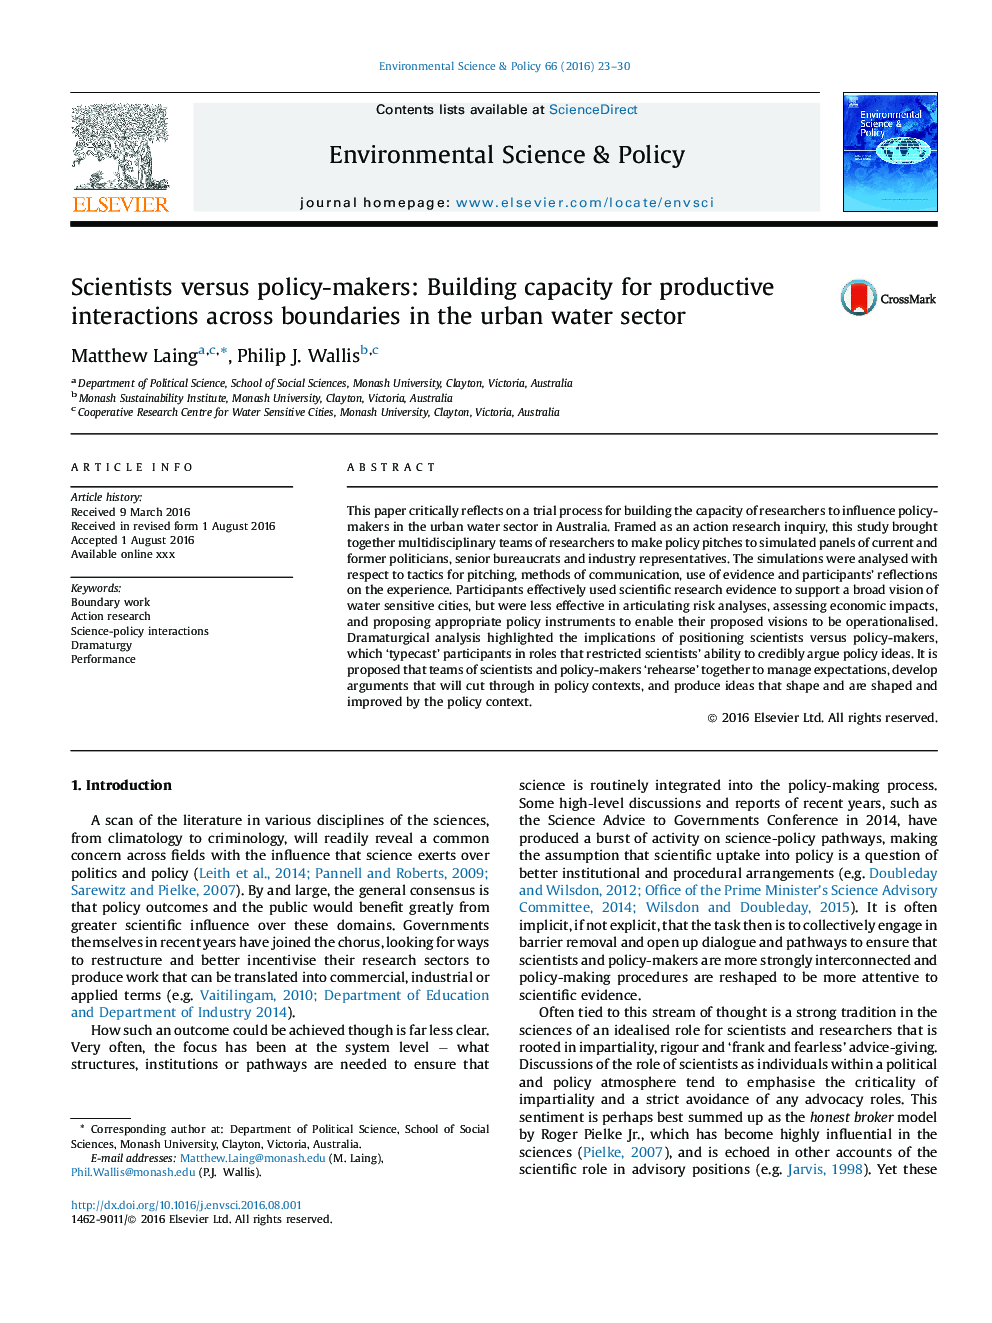 Scientists versus policy-makers: Building capacity for productive interactions across boundaries in the urban water sector